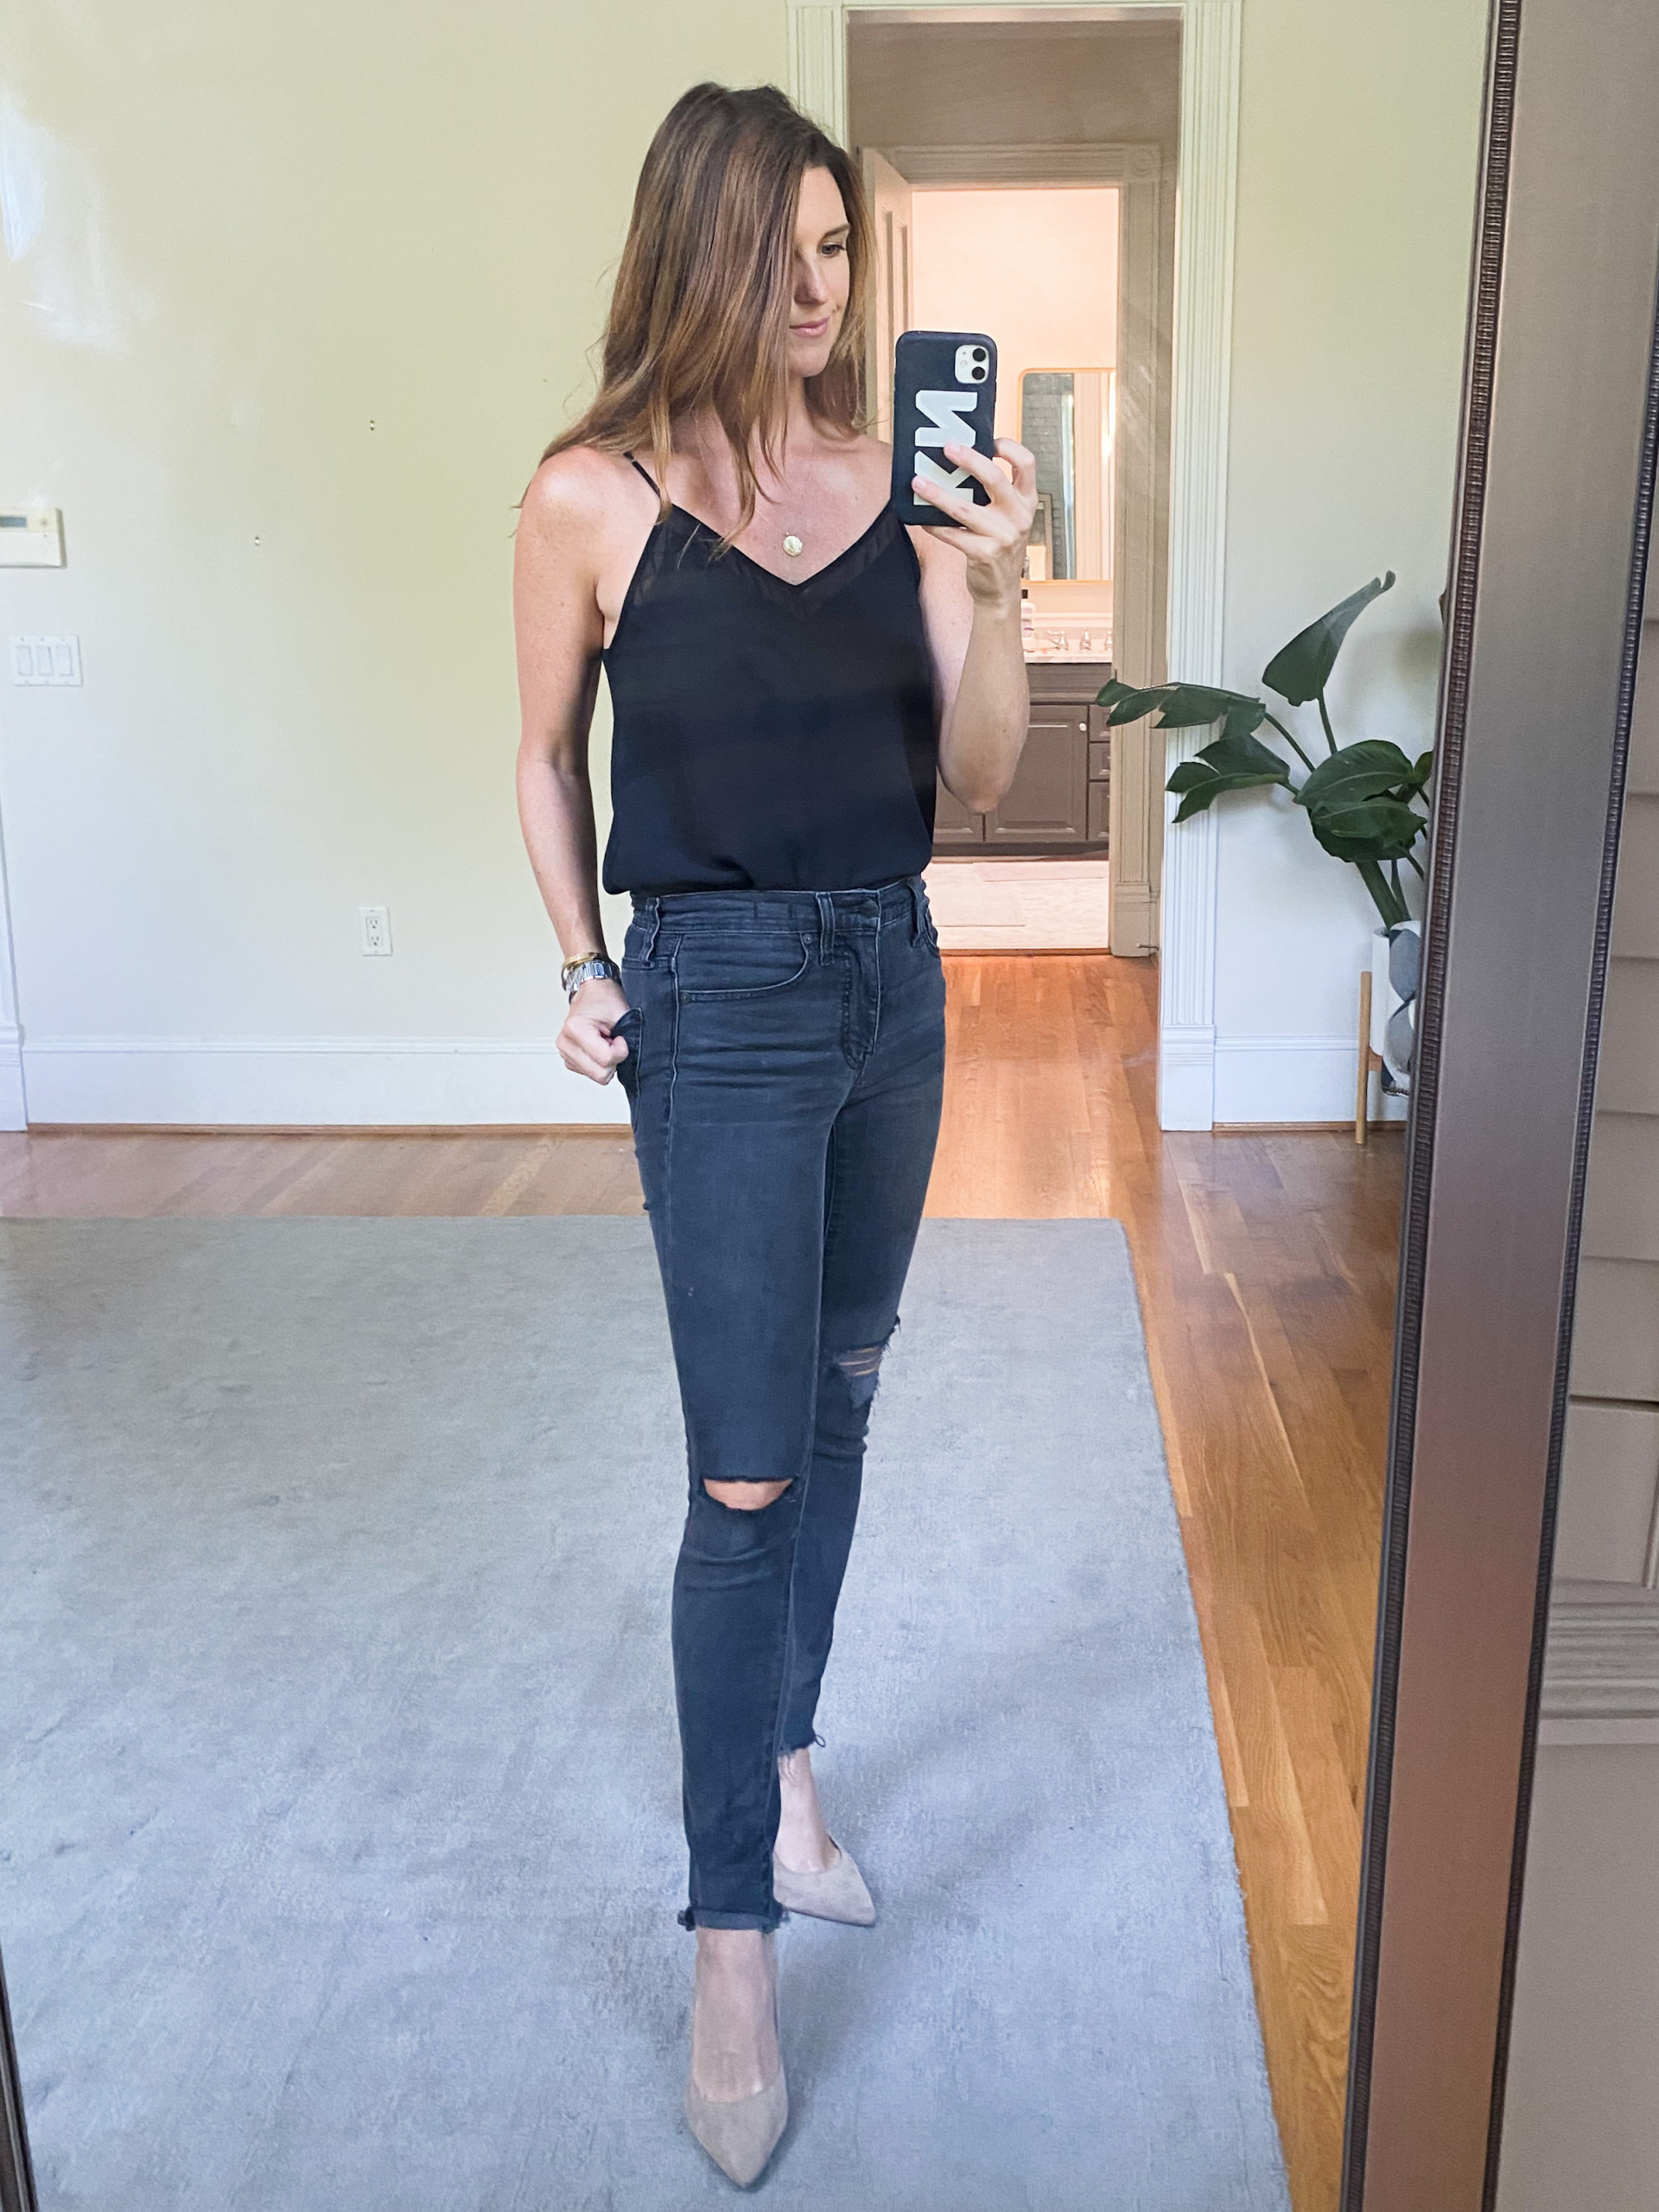 All black cami and denim look, fall outfit ideas, what to wear at the end of summer, neutral style, finding beauty mom outfit ideas 